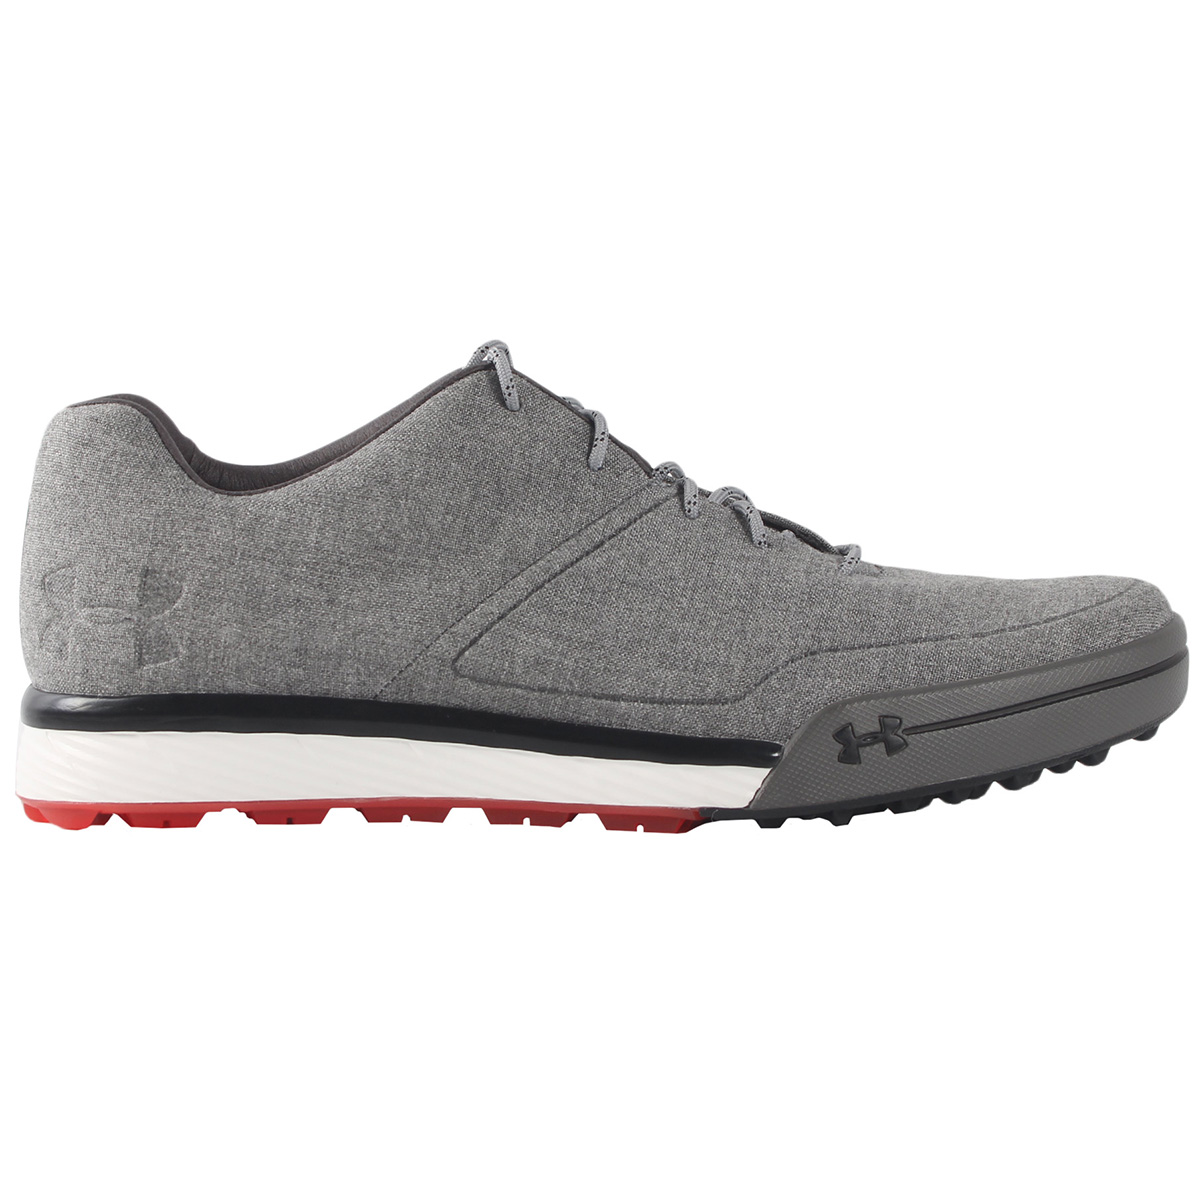 Under Armour Tempo Hybrid 2 Shoes 